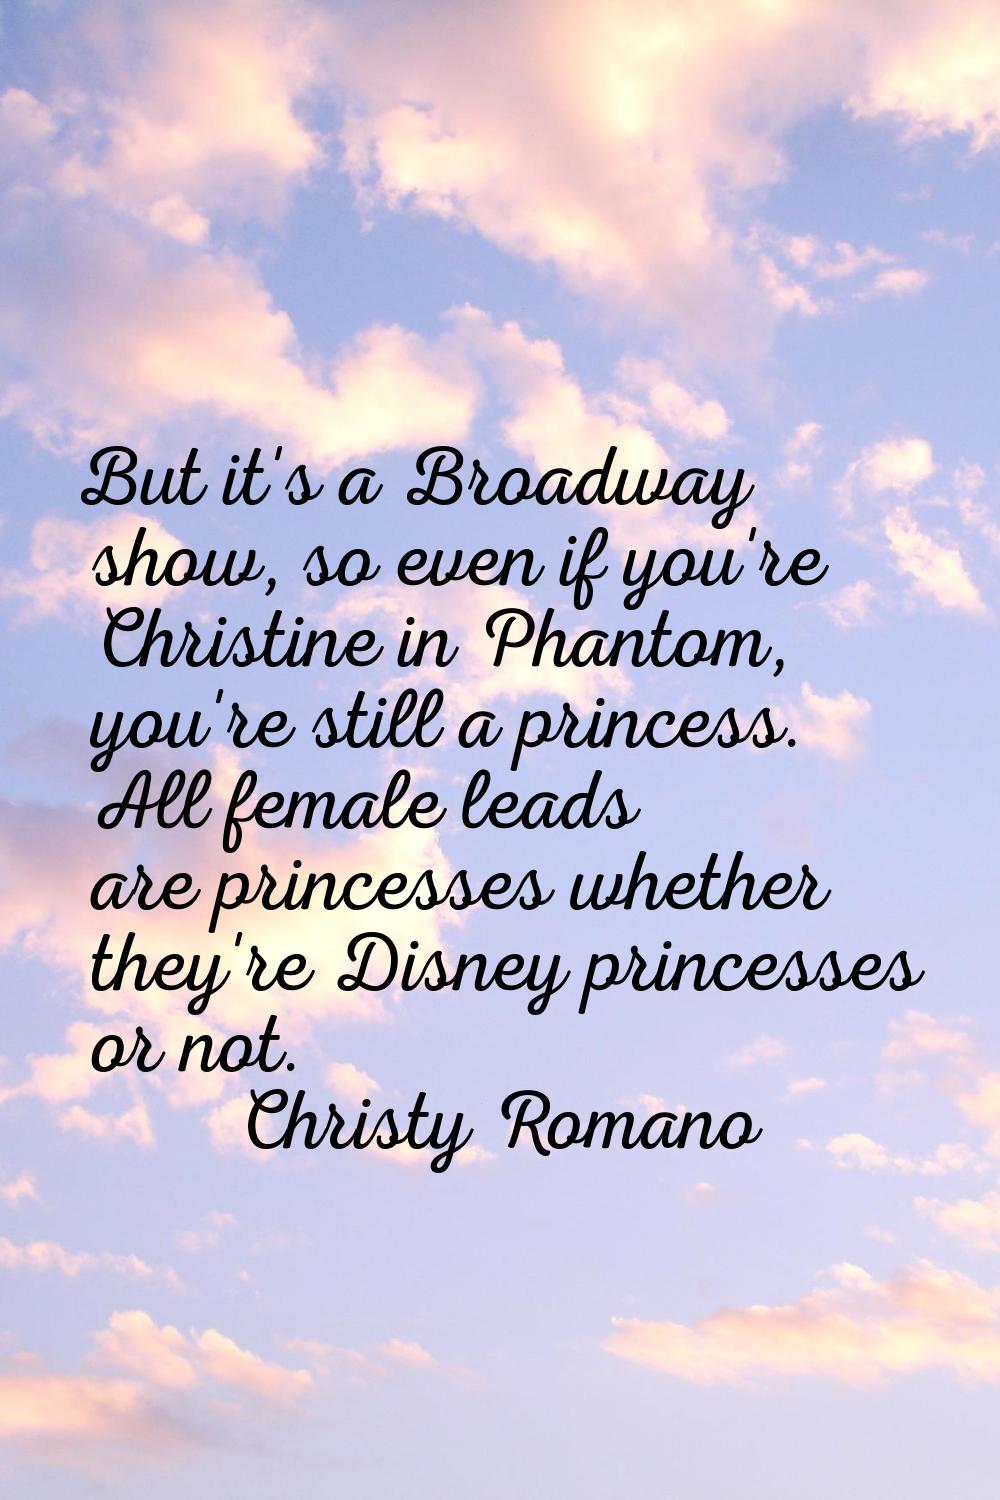 But it's a Broadway show, so even if you're Christine in Phantom, you're still a princess. All fema